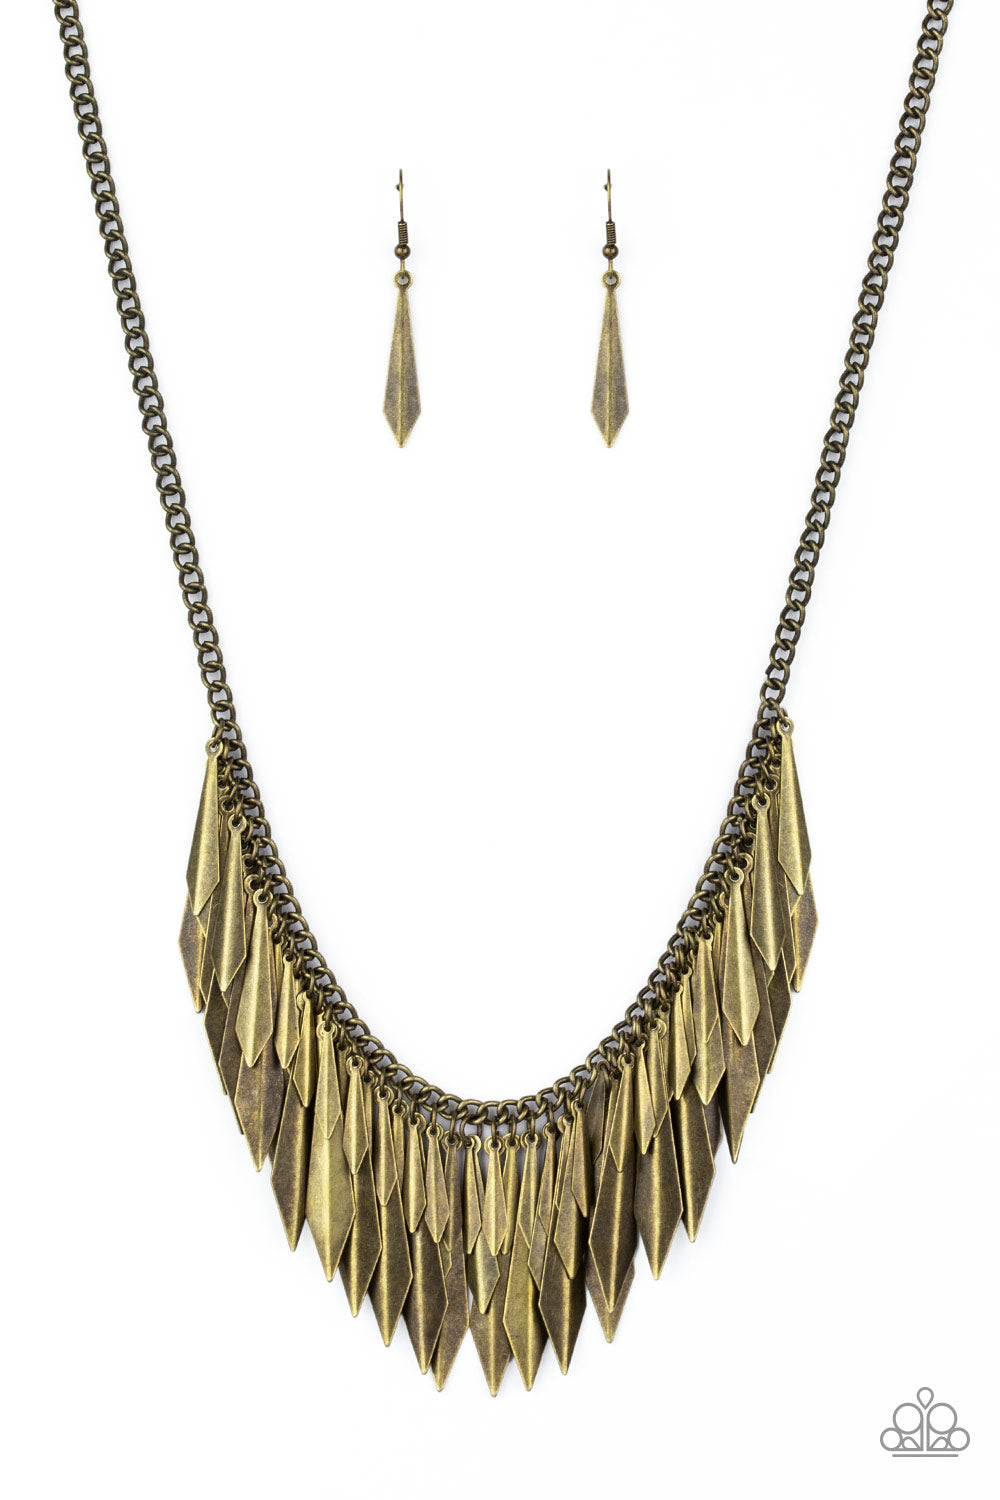 THE THRILL-SEEKER - BRASS NECKLACE